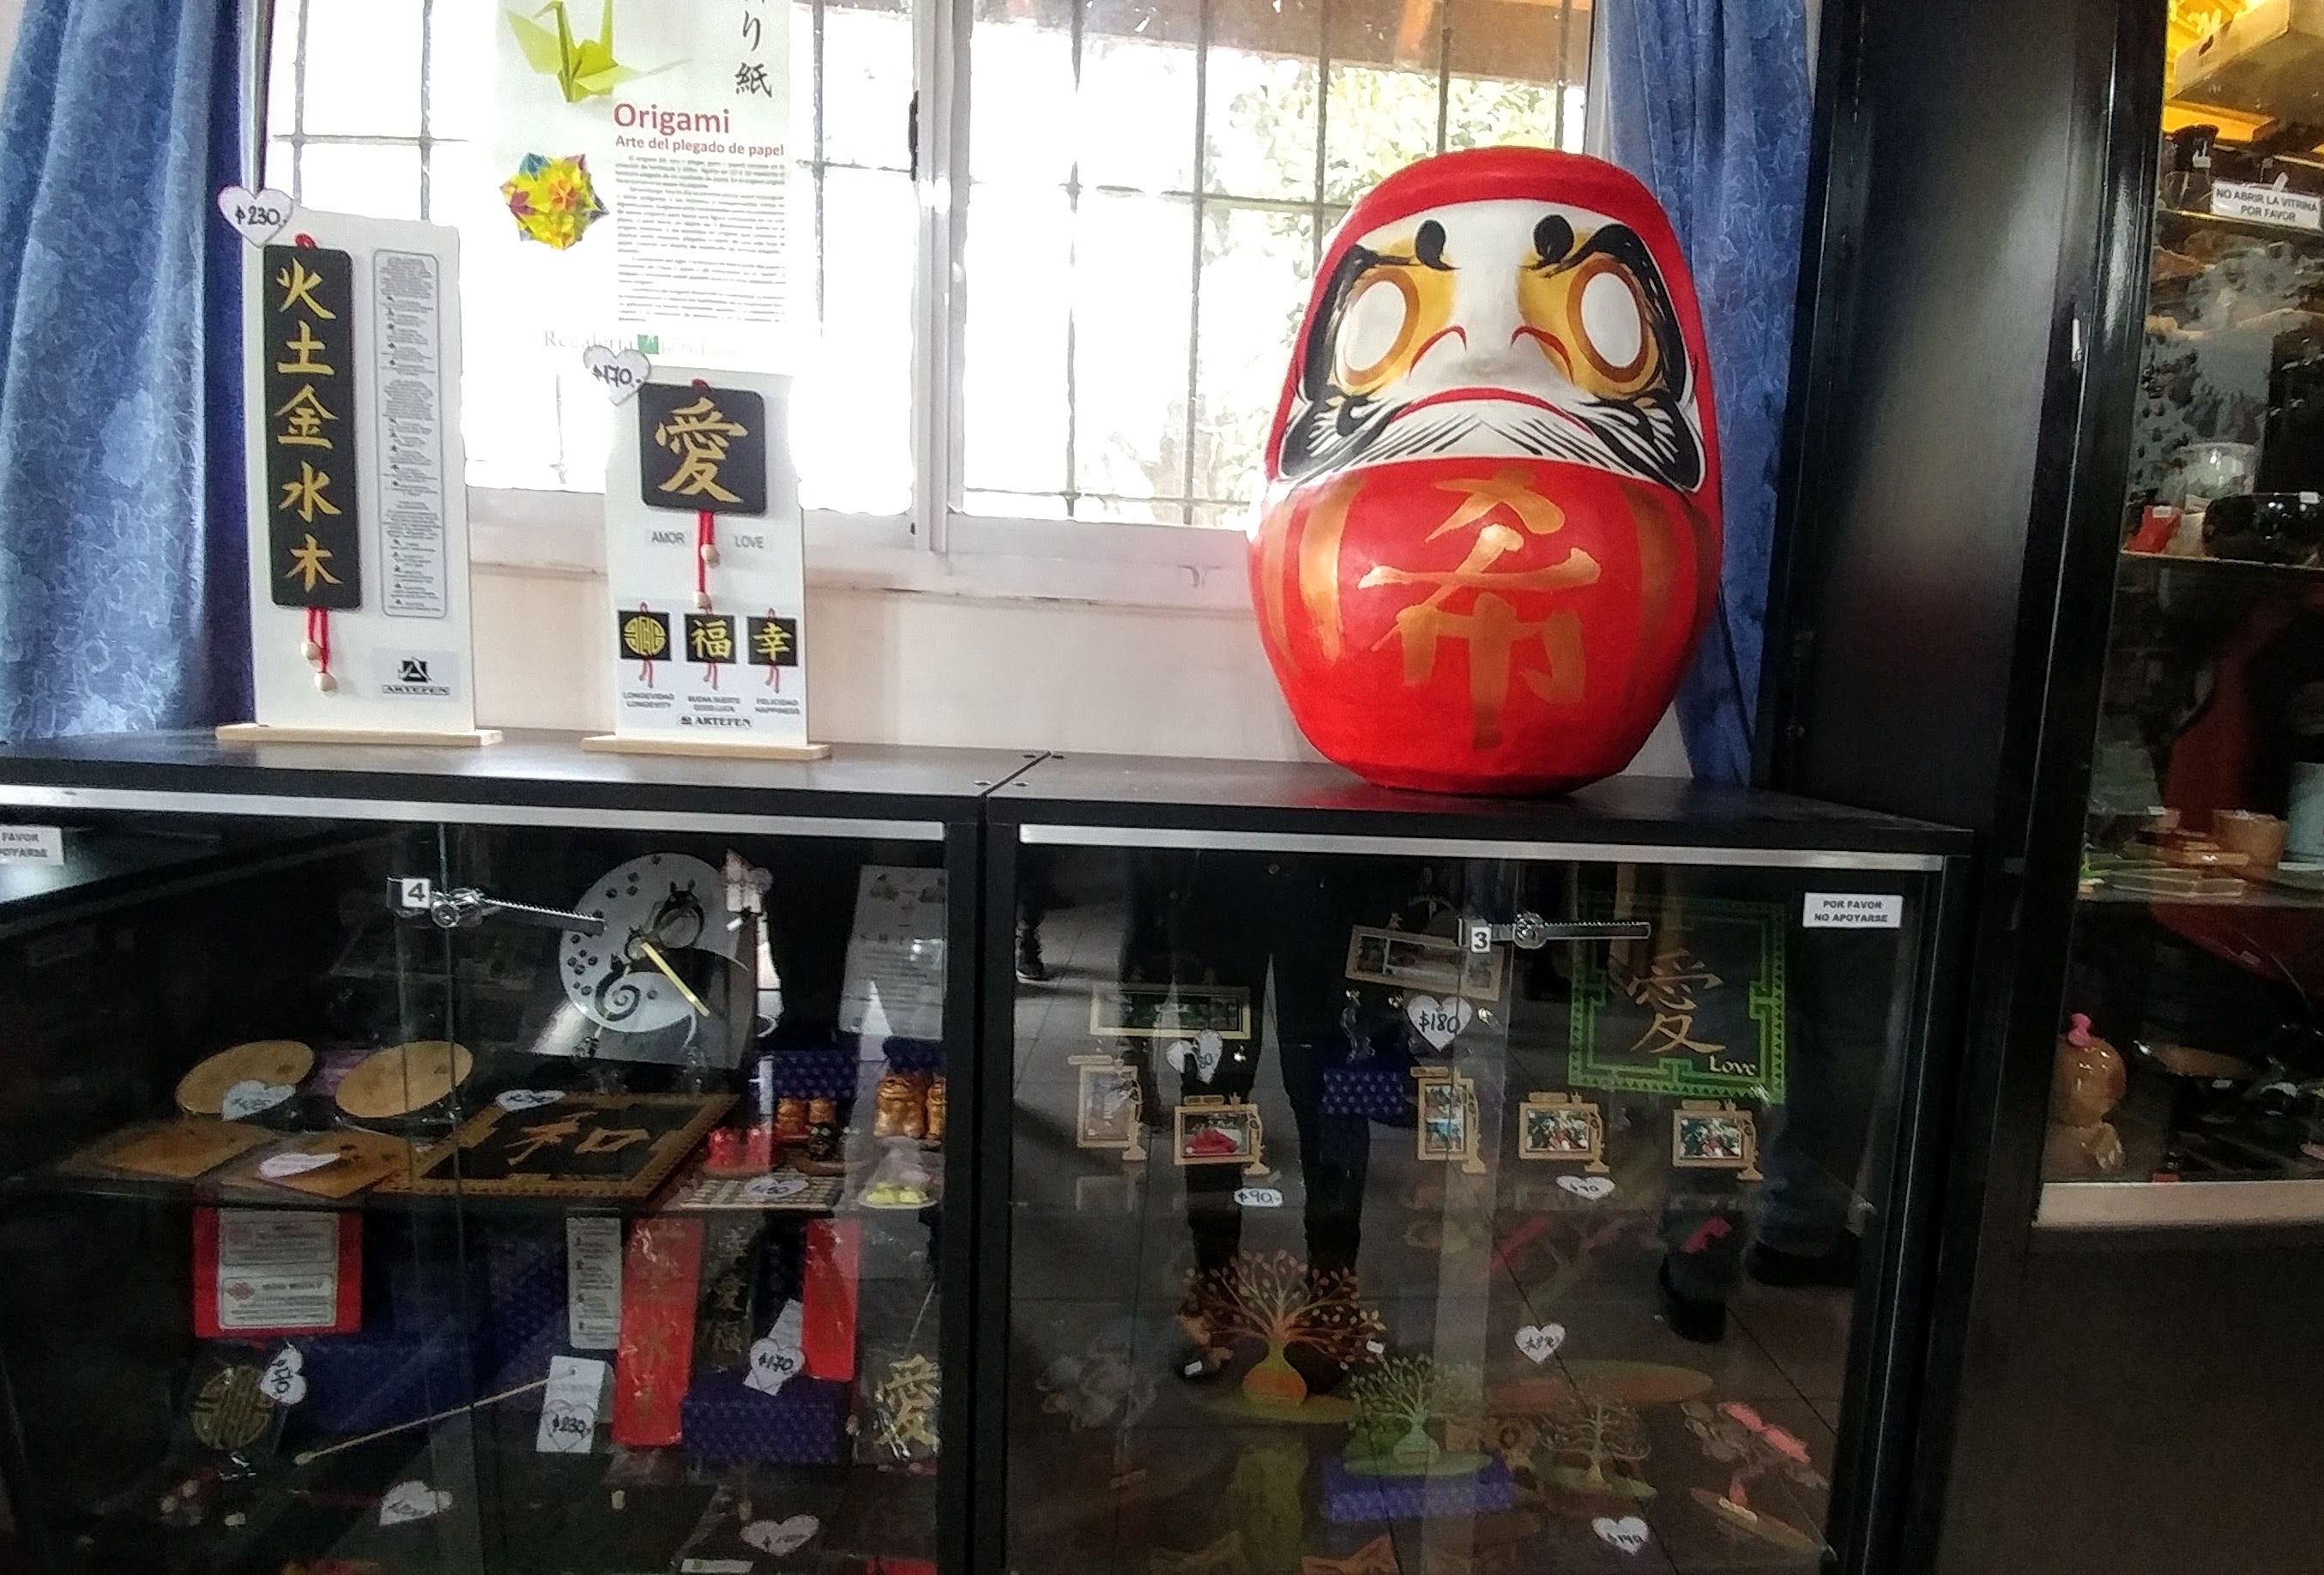 Caption: A photo taken in the inside of the gift shop with a big Daruma.